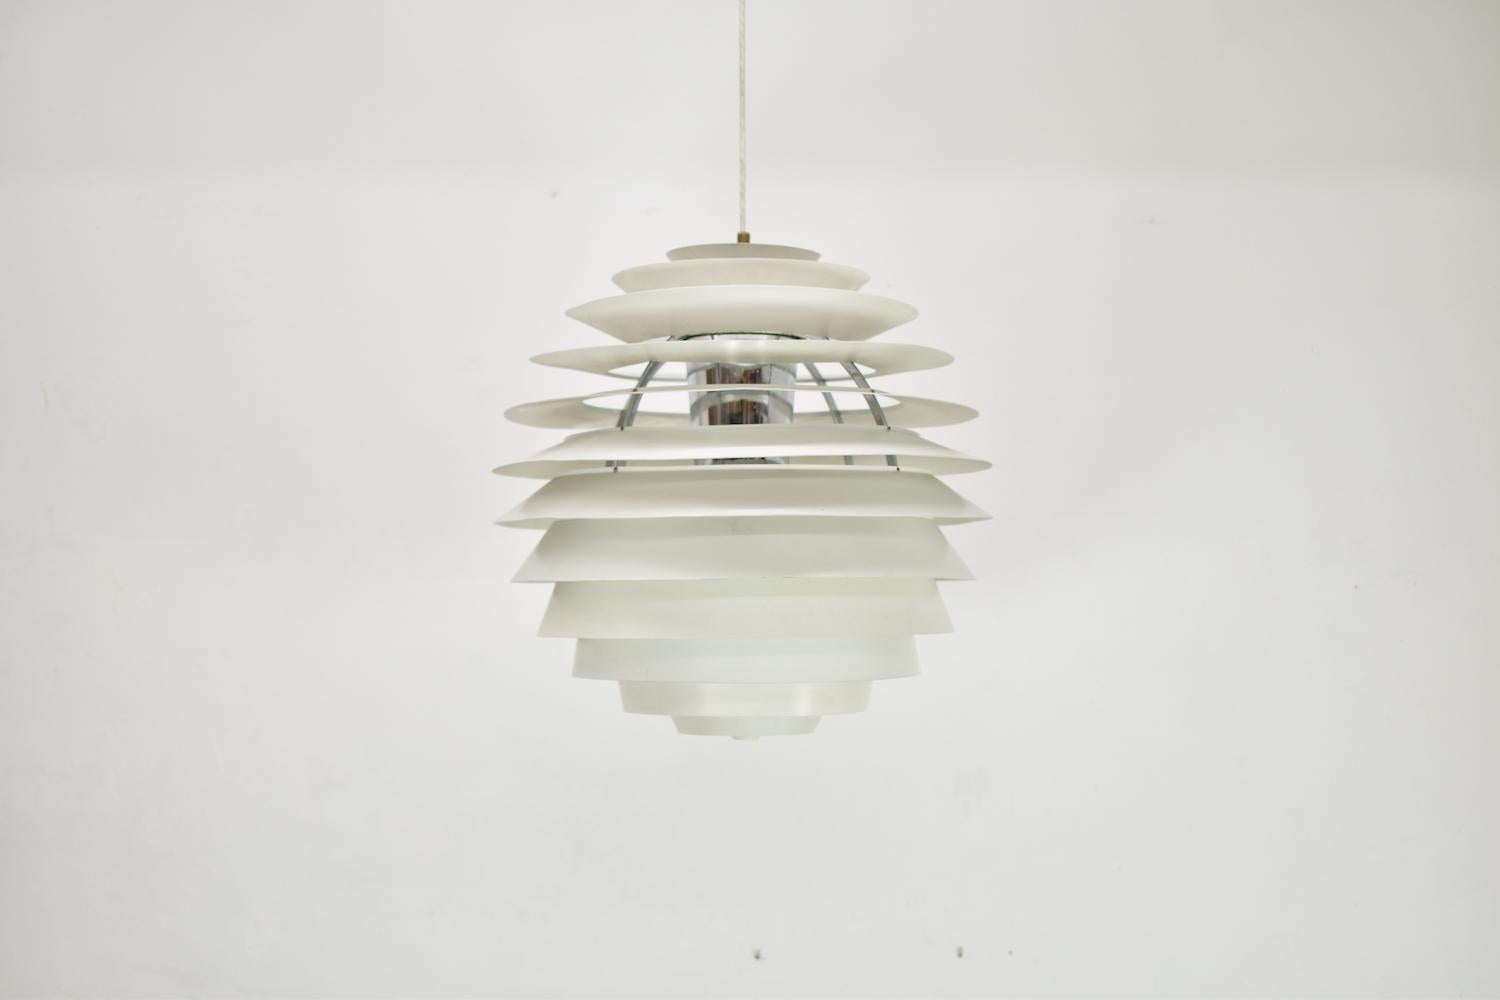 Stunning ‘Louvre’ pendant designed by Poul Henningsen for Louis Poulsen, Denmark 1957. Originally designed for the Adventist Church in Skodsborg. Created from 13 matte white lacquered shades that provide a uniform light spreading. Beautiful original